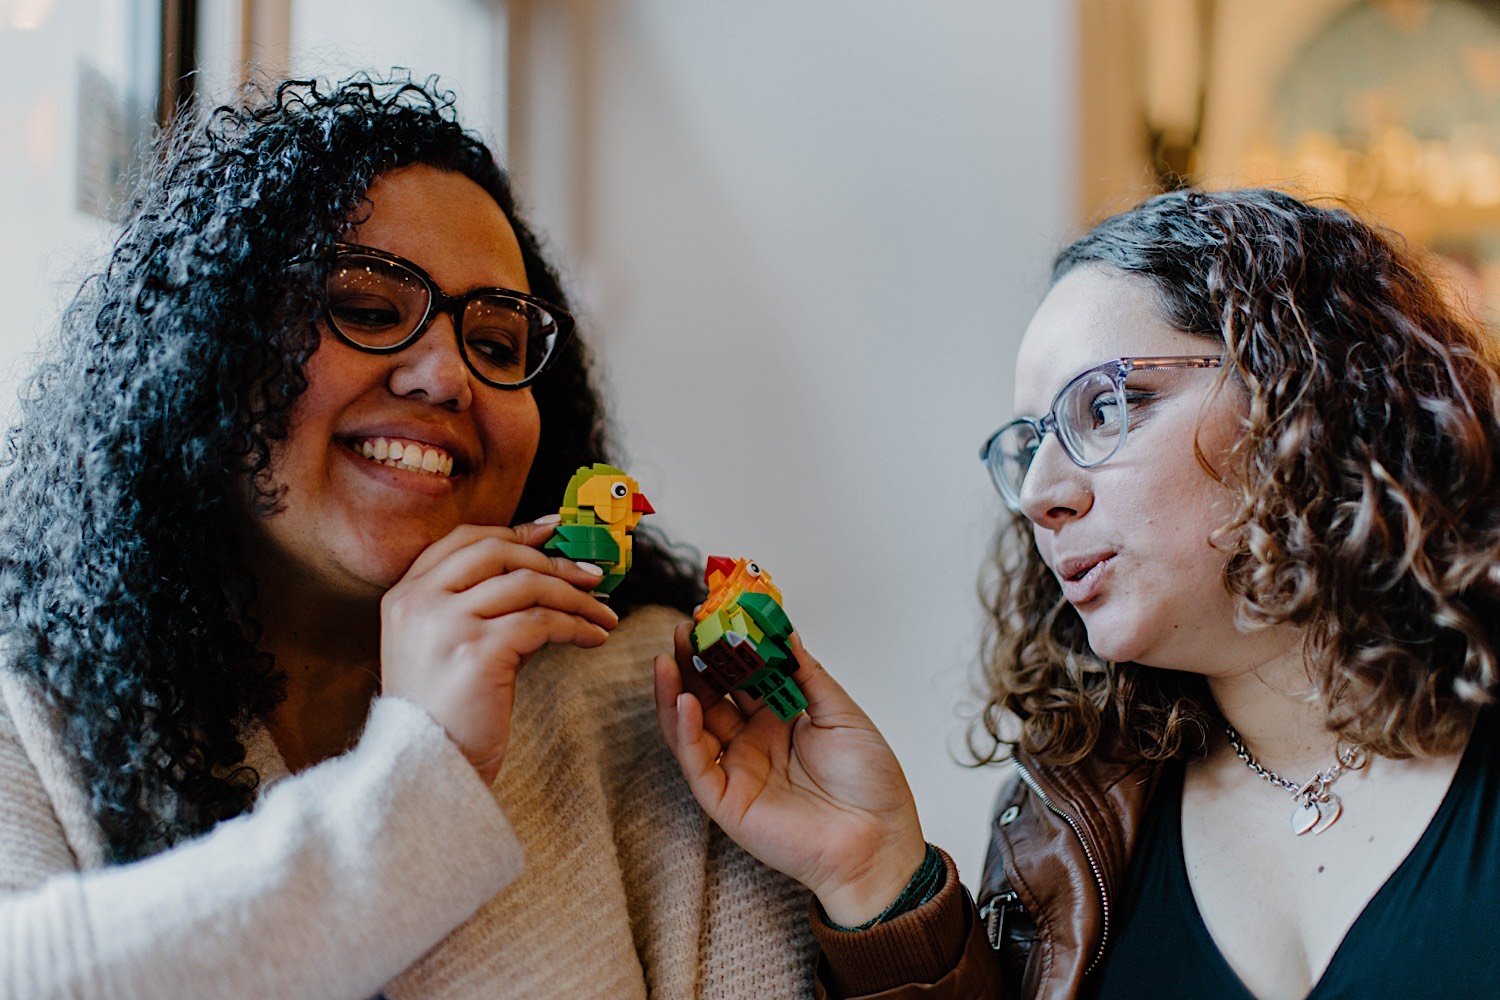 Couple holding Lego parrots playing with one another and smiling at eachother